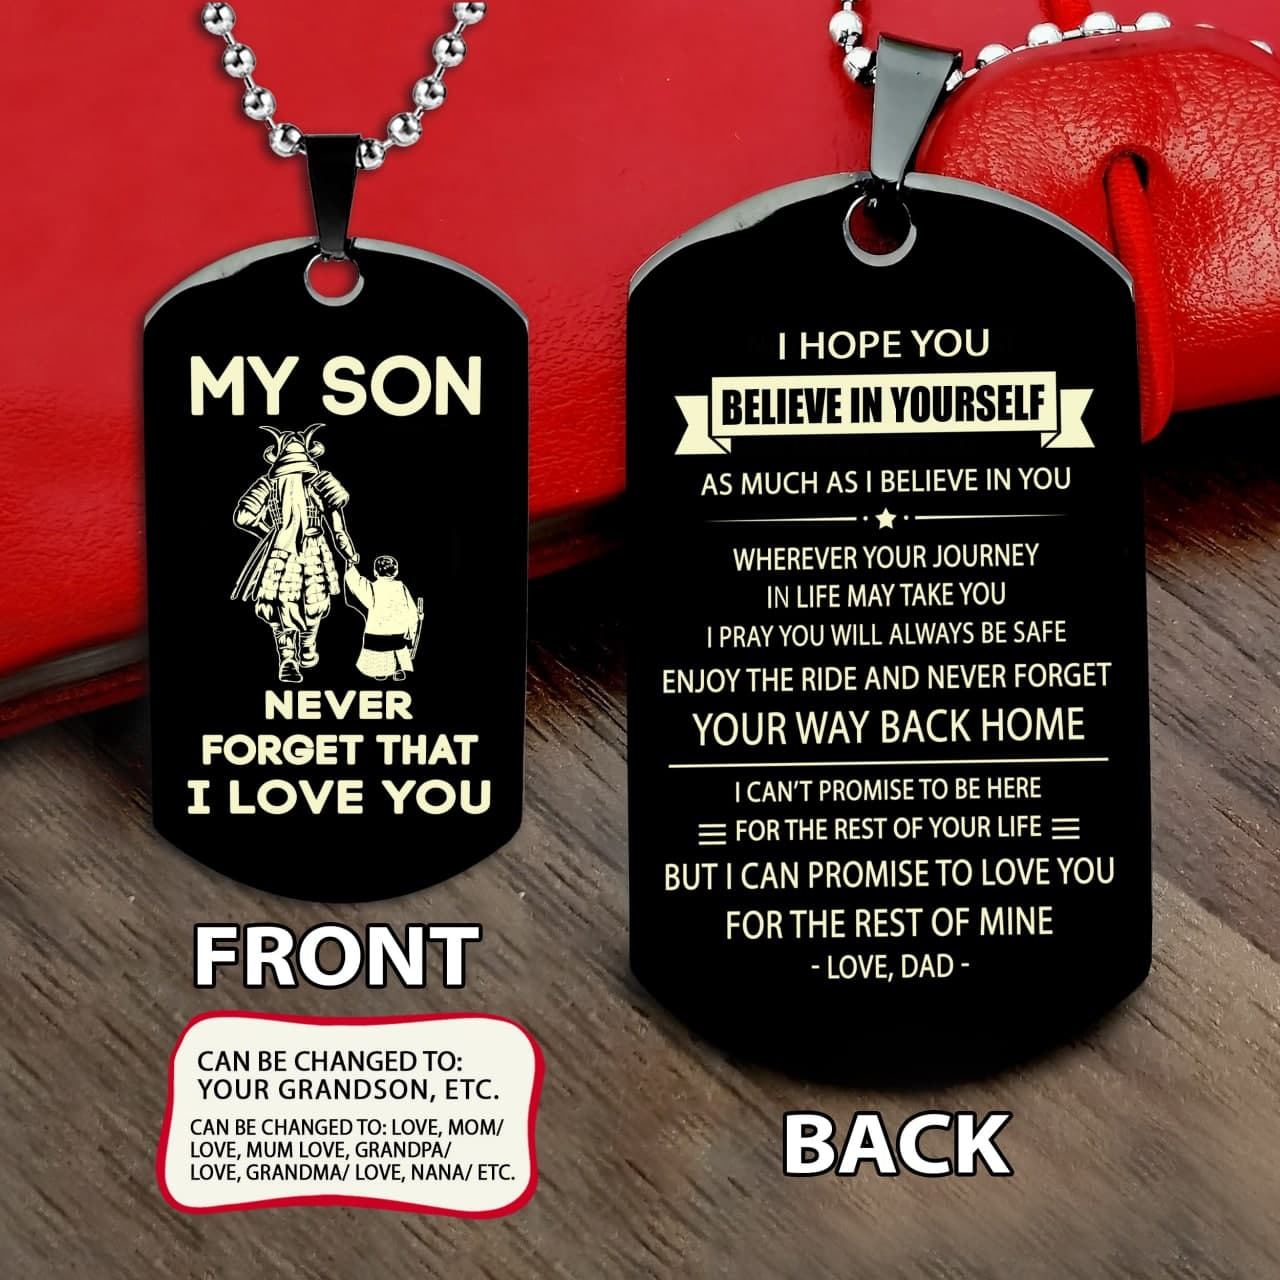 Samurai customizable engraved double sided dog tag, gifts from dad mom to son- Be strong be brave be humble, It is not about better than someone else, It is about being better than you were the day before